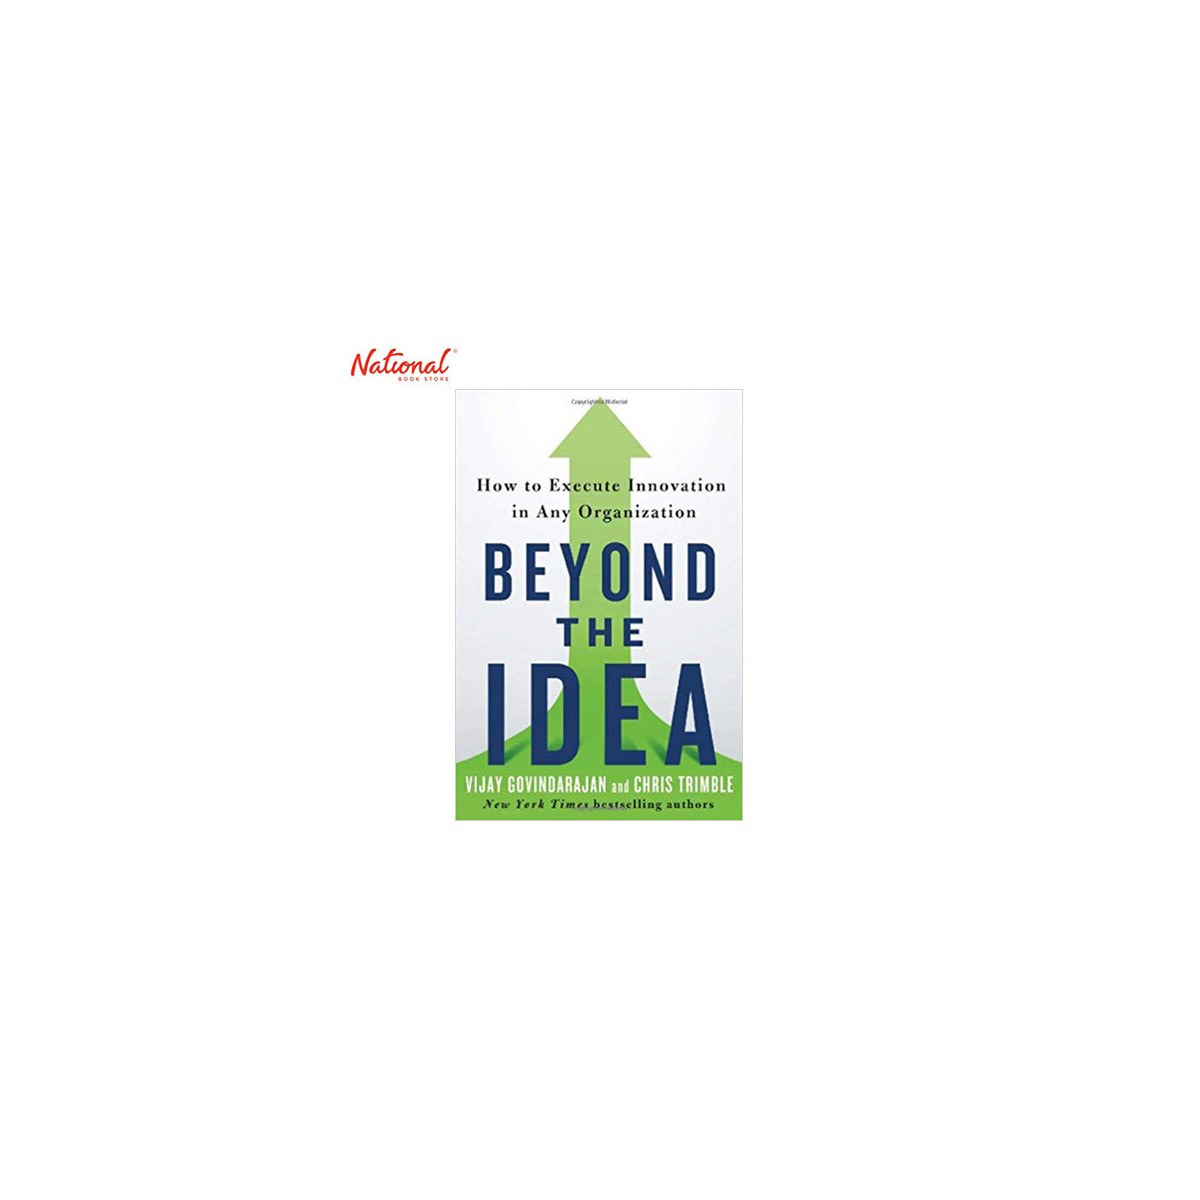 BEYOND THE IDEA: HOW TO EXECUTE INNOVATION IN ANY ORGANIZATION HARDCOVER